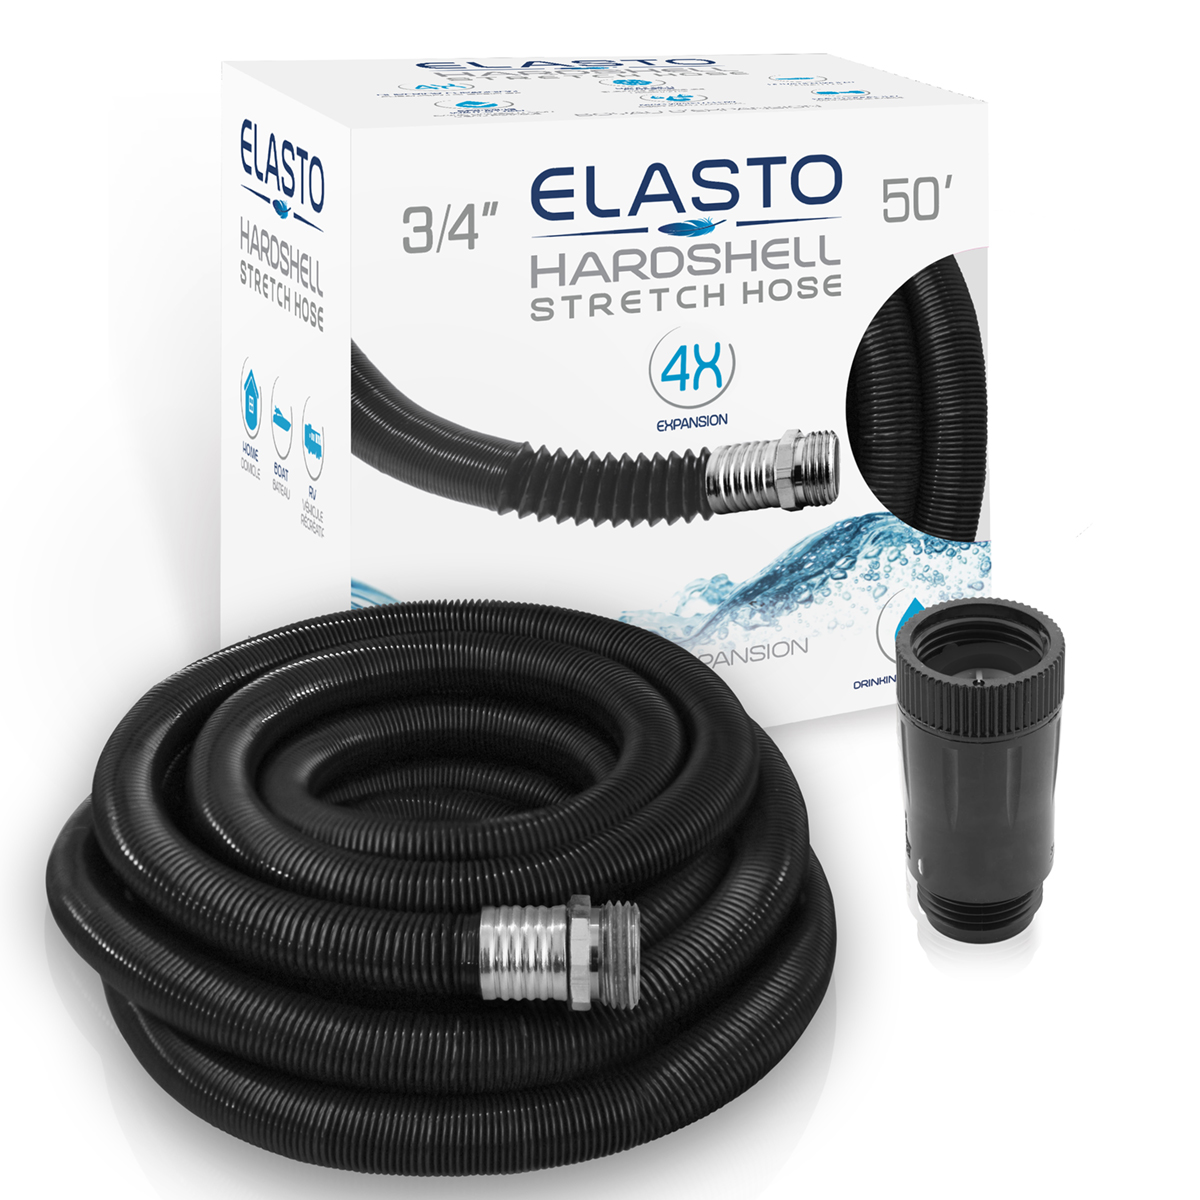 Picture of Elasto Hard-Shell Stretch Hose 50'